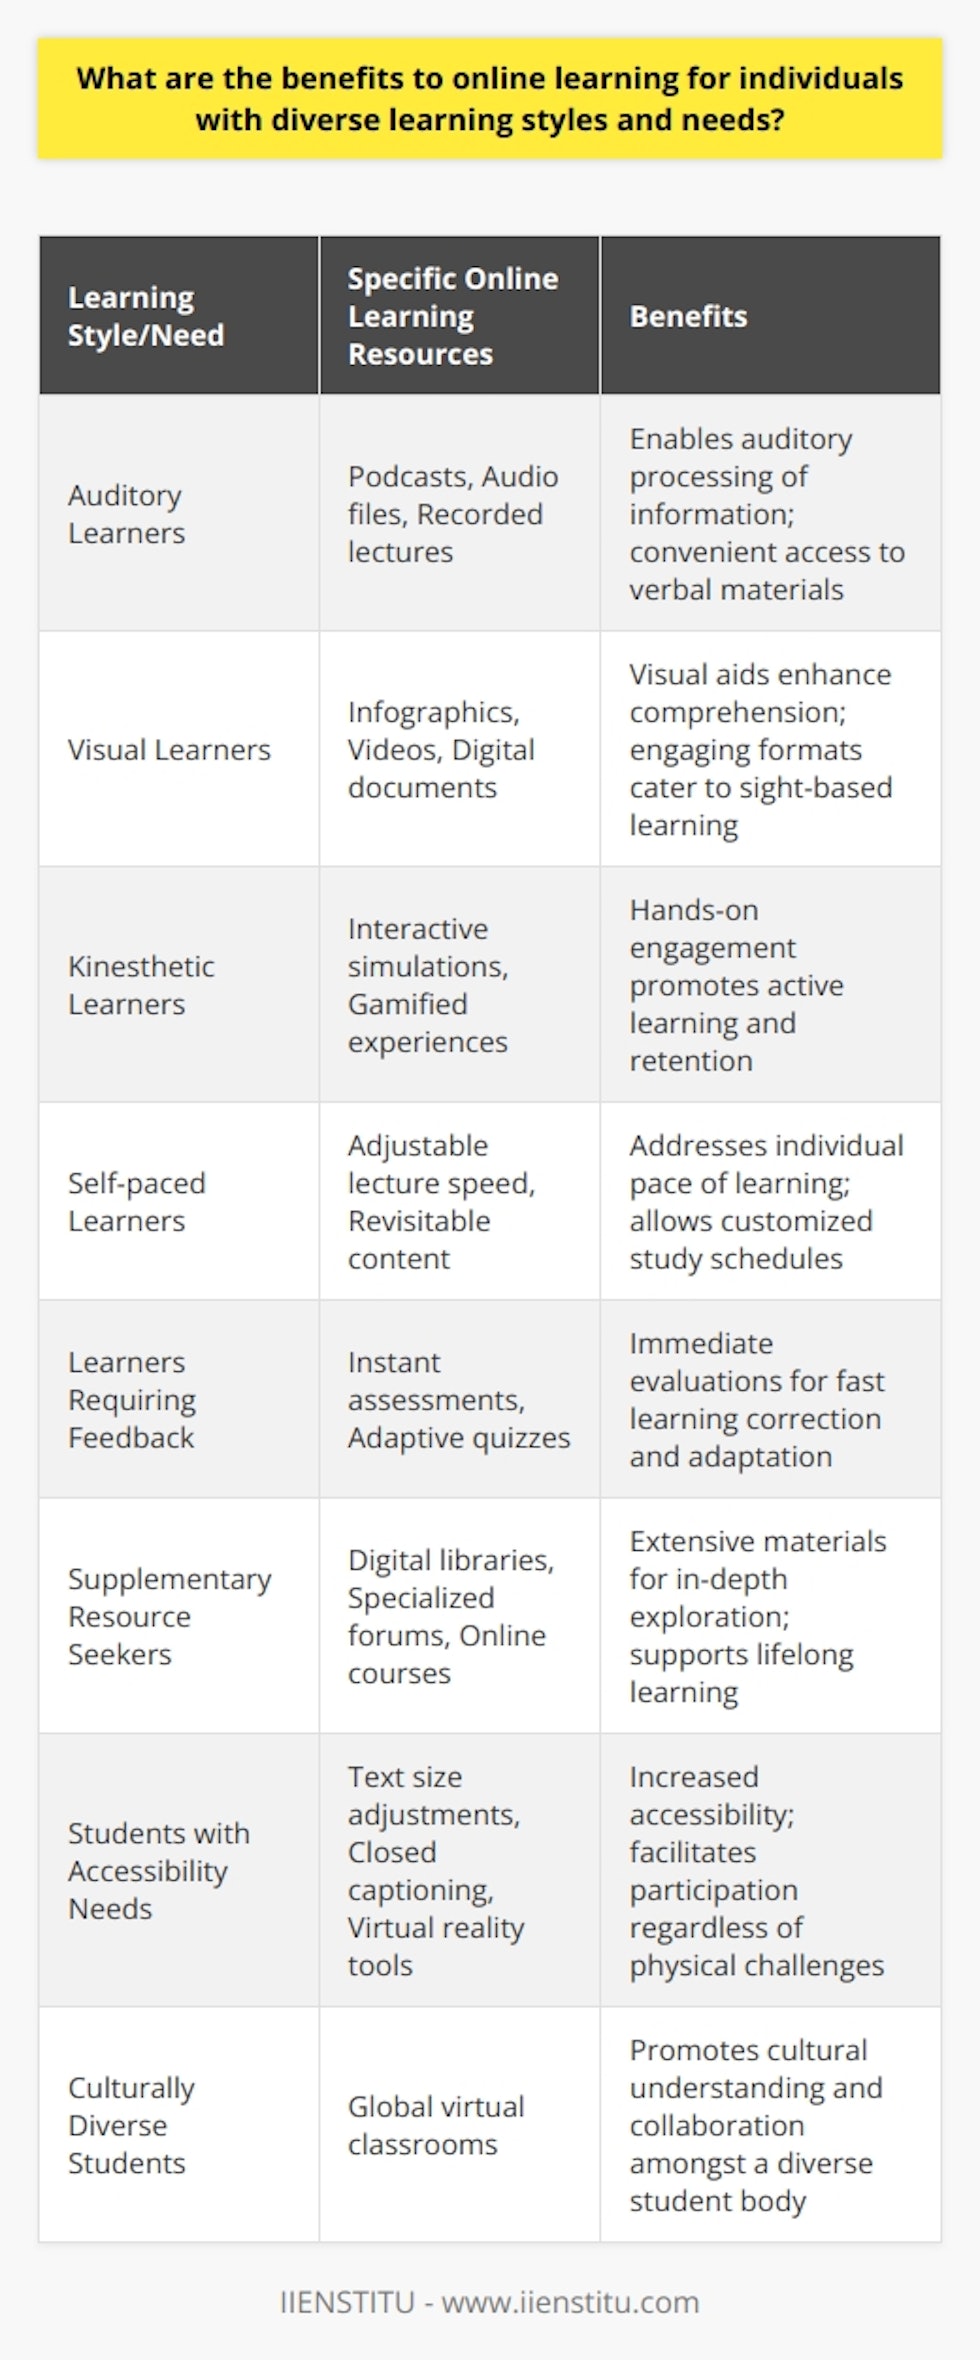 Online learning offers several advantages tailored to cater to individuals with varied learning styles and unique educational needs. The flexibility of digital educational platforms means that resources can be adapted to suit the differing preferences of auditory, visual, and kinesthetic learners. For instance, auditory learners benefit from lectures and discussions that are available as podcasts or audio files, while visual learners can take advantage of infographics, videos, and well-crafted documents. Kinesthetic learners have access to interactive simulations and gamified learning experiences that support hands-on engagement.Self-paced learning lies at the heart of online education, offering a significant advantage to learners who process information at different speeds. This is crucial for individuals who may require more time to understand complex concepts or those with attention issues that affect their learning tempo. The ability to pause and revisit lectures, and to dedicate more time where needed without the fear of lagging behind the class, ensures that each student can learn thoroughly and without undue stress.Online learning environments often feature advanced assessment tools that provide instant and detailed feedback. Such instantaneous responses allow for a more adaptive learning experience, where students can quickly identify their mistakes and correct them, promoting better retention and mastery of content. Additionally, the anonymity of online assessments can reduce test anxiety, providing a more comfortable assessment experience for many learners.For those who require a tailored educational journey, online learning enables access to a plethora of resources that can be used to supplement their learning. Digital libraries, niche educational forums, and diverse online courses allow individuals to explore topics at depth, fostering an environment that encourages learners to become self-sufficient and engaged in lifelong education.Inclusivity is another hallmark of online education. The digital classroom is inherently more accessible, as it removes the physical hurdles that may hinder someone from attending traditional schools. With features like adjustable text sizes, closed captioning, and virtual reality tools, individuals with various physical and psychological challenges are better supported. The virtual environment also allows for a more diverse body of students to interact, enhancing cultural understanding and cooperation.An educational institution that exemplifies the integration of these benefits into online learning is IIENSTITU, which has devised a plethora of online courses and resources designed to accommodate a range of learning preferences. Through tailored offerings and a commitment to providing a high-quality educational experience, IIENSTITU demonstrates how the effective use of online learning resources can greatly benefit individuals with diverse educational needs.